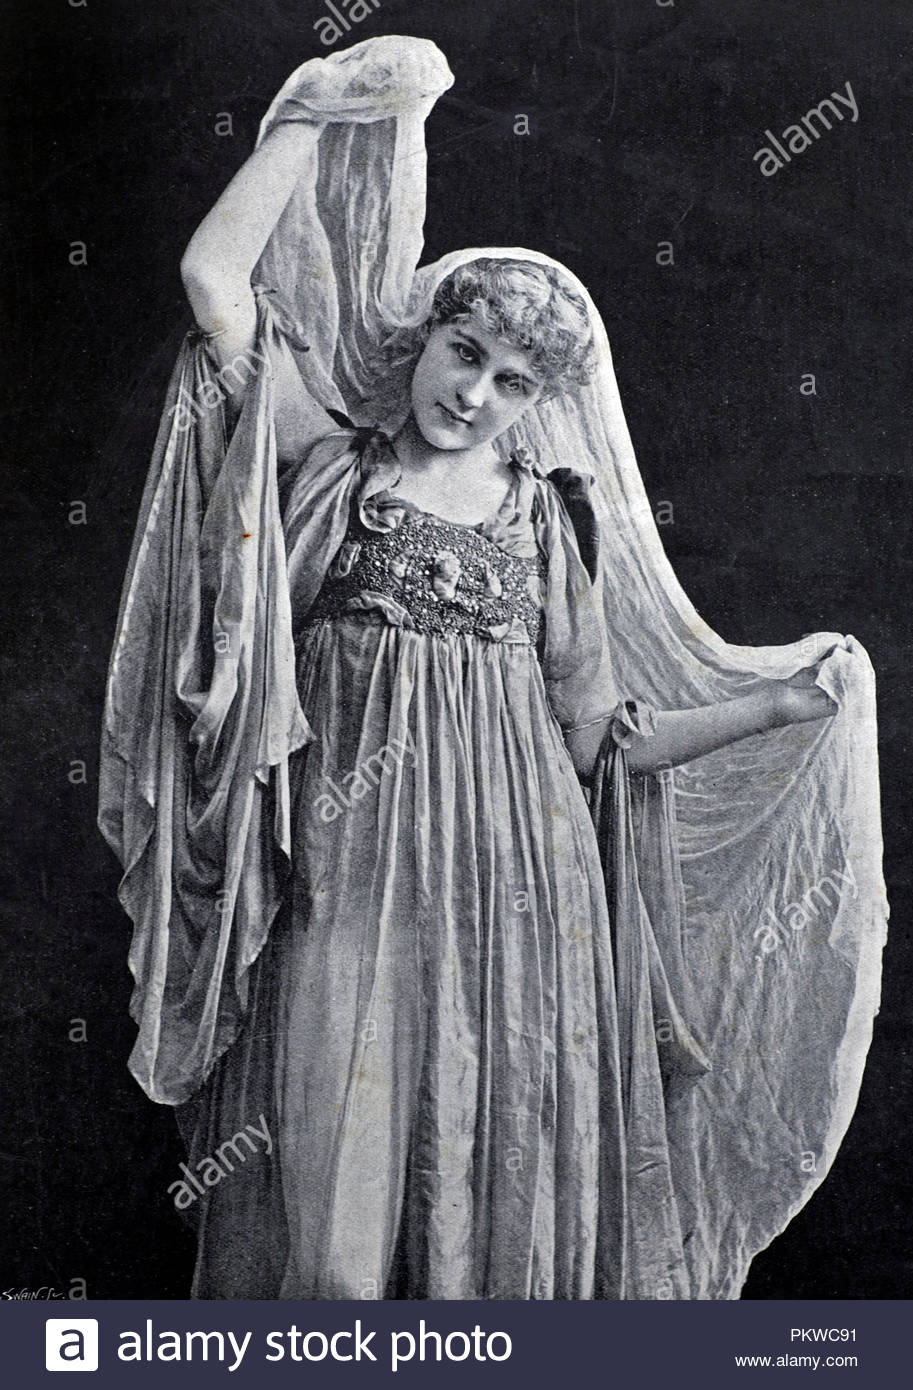 Lettice Fairfax, 1876 – 1948, was an English stage and silent film actress. She is known for her roles in the Edwardian musical comedy An Artist's Model (1895) and in silent cinema such as Brother Officers as Baroness Honour Royden (1915), photograph from 1890s Stock Photo